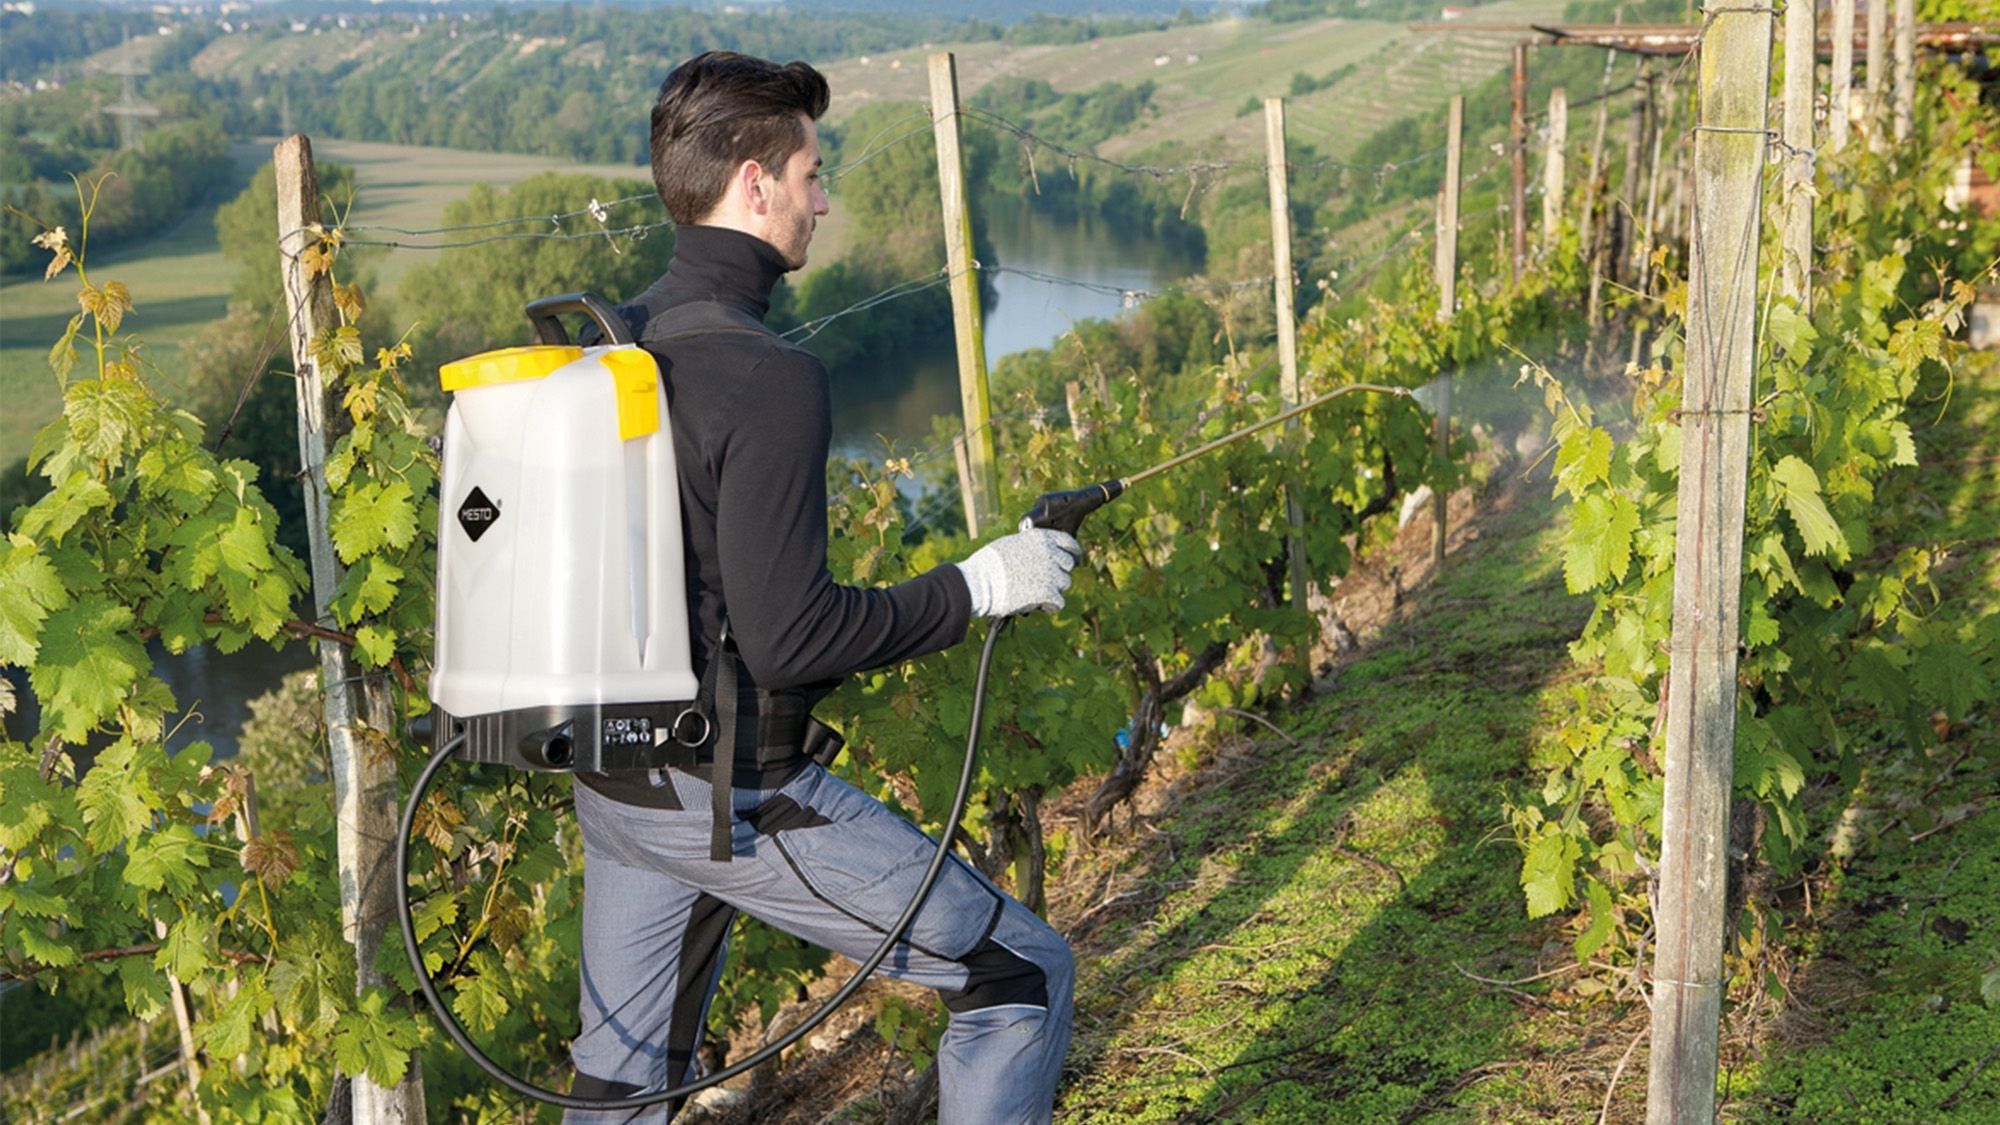 Backpack sprayer is used by a man in the vineyard